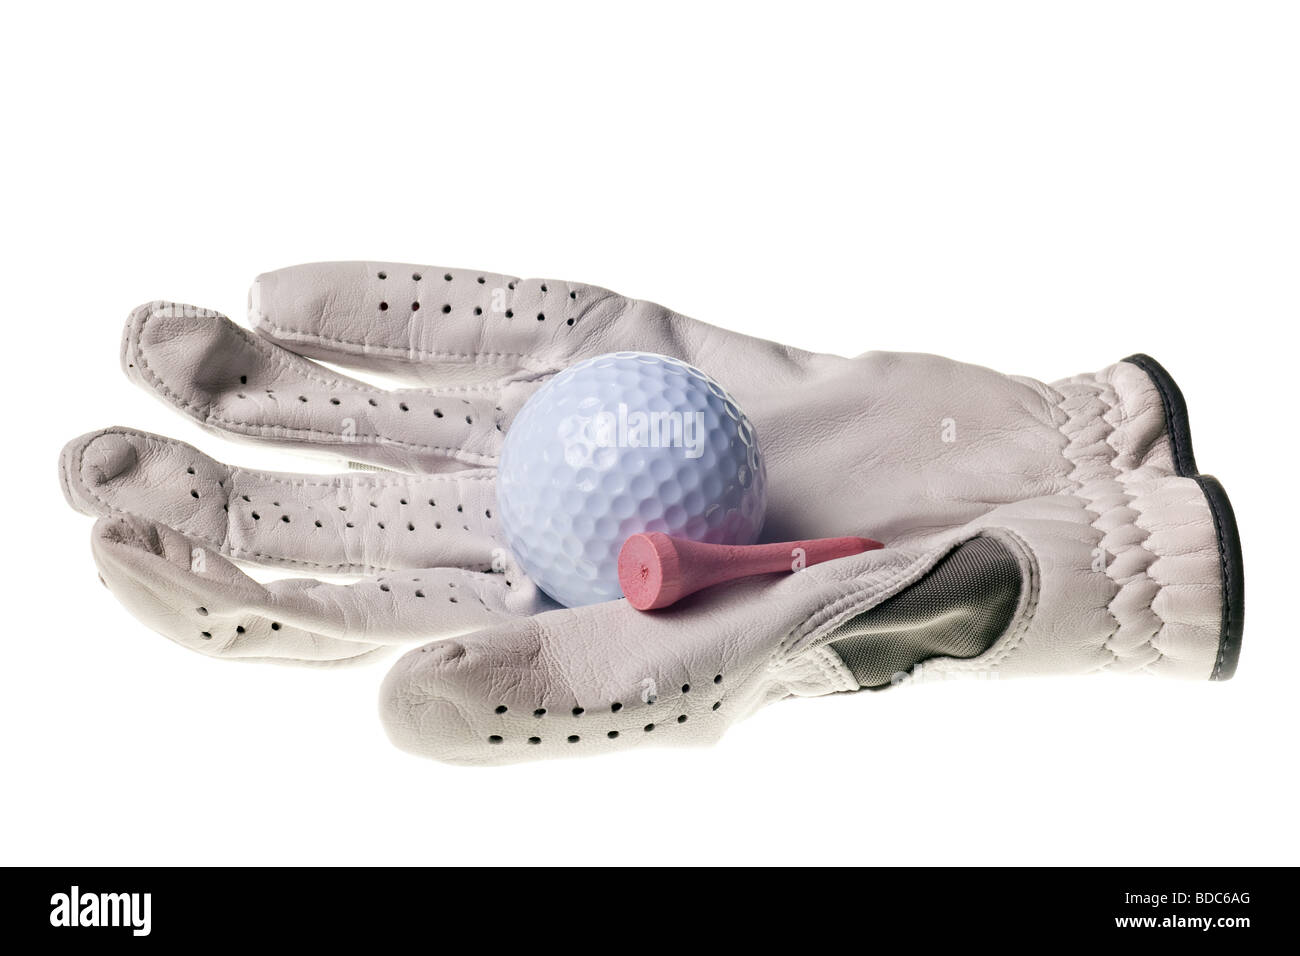 golf ball and glove isolated on a pure white background Stock Photo